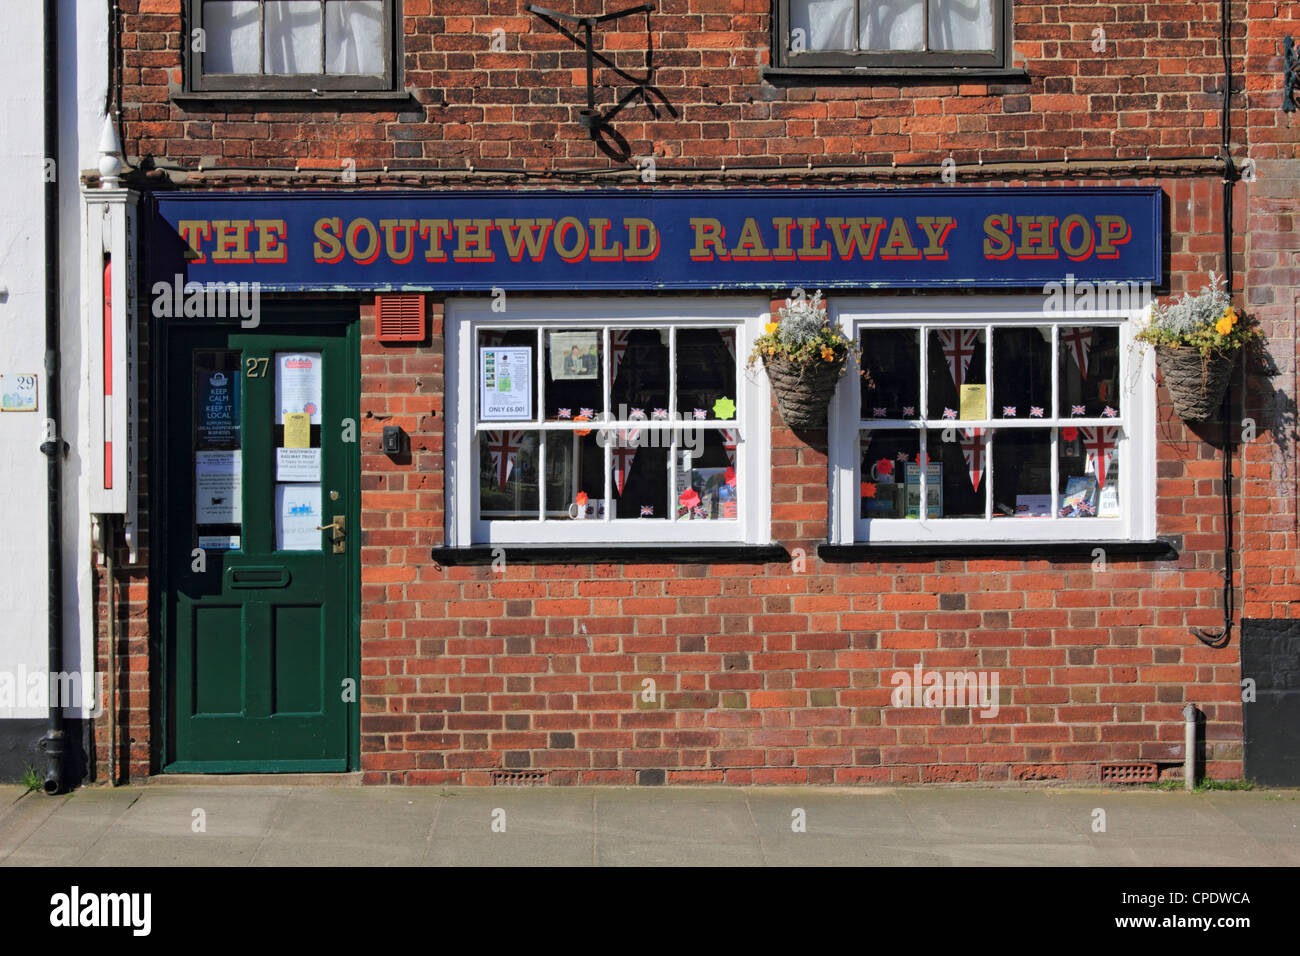 The Southwold Railway Shop in the High Street Southwold Suffolk England UK Stock Photo